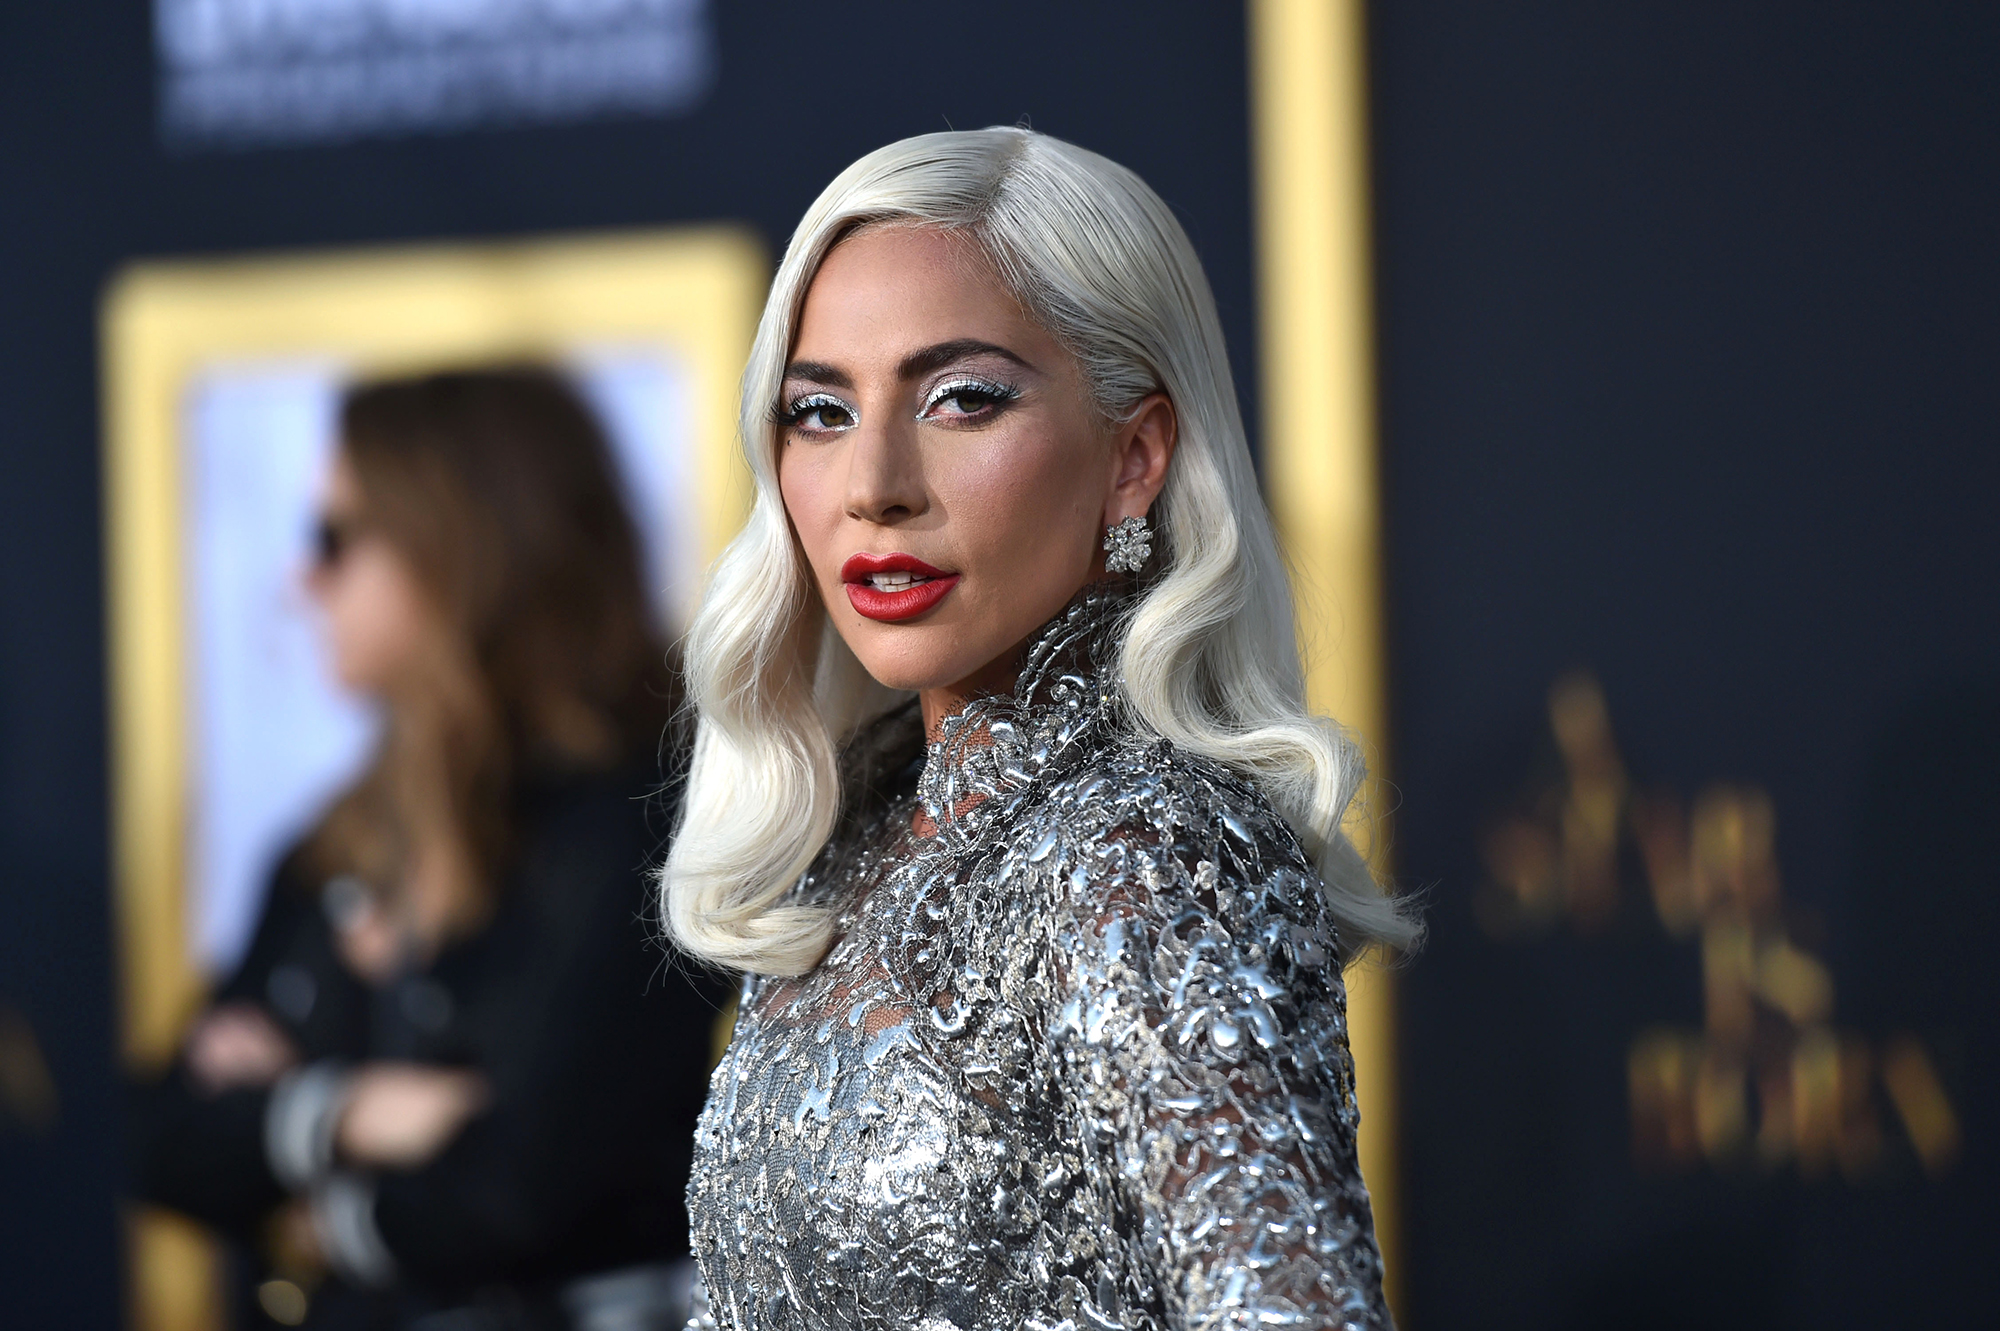 LOS ANGELES, CALIFORNIA - SEPTEMBER 24: Lady Gaga arrives at the Premiere Of Warner Bros. Pictures' 'A Star Is Born' at The Shrine Auditorium on September 24, 2018 in Los Angeles, California. (Photo by Neilson Barnard/Getty Images) (Neilson Barnard—Getty Images)